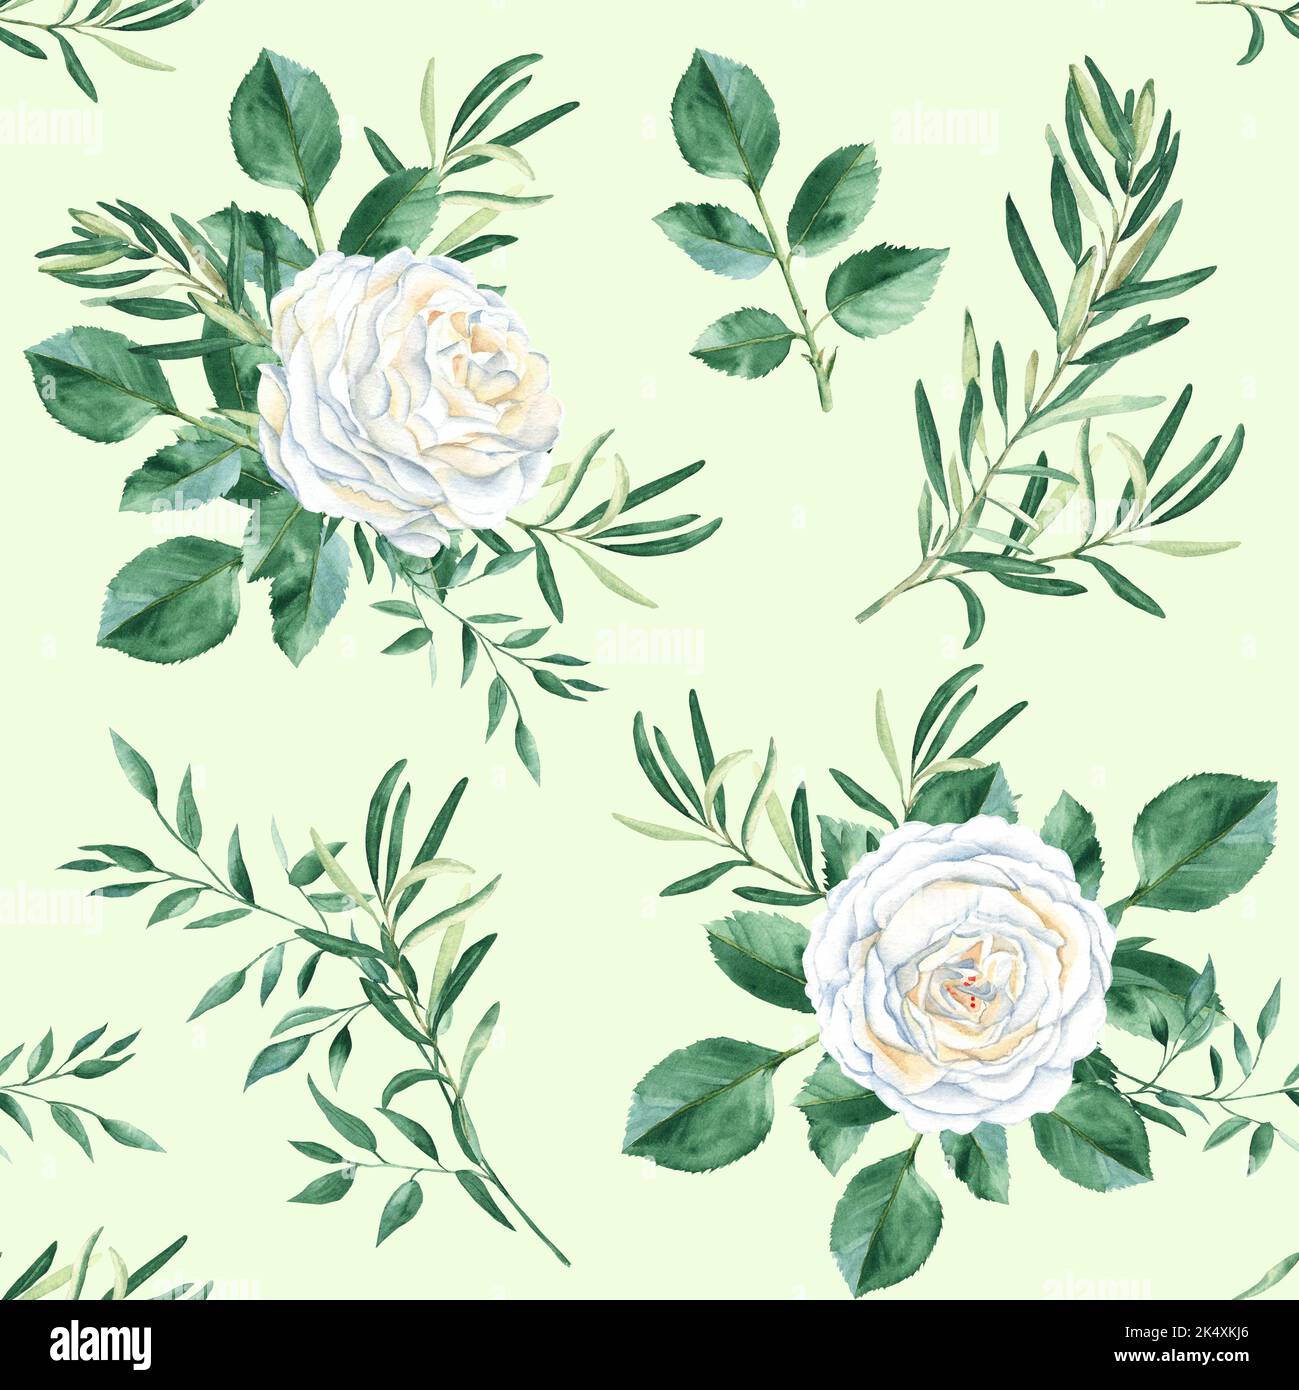 Seamless pattern with white roses, olive and pistachio branches on light green background. Watercolor illustration. Rustic style. Can be used for Stock Photo